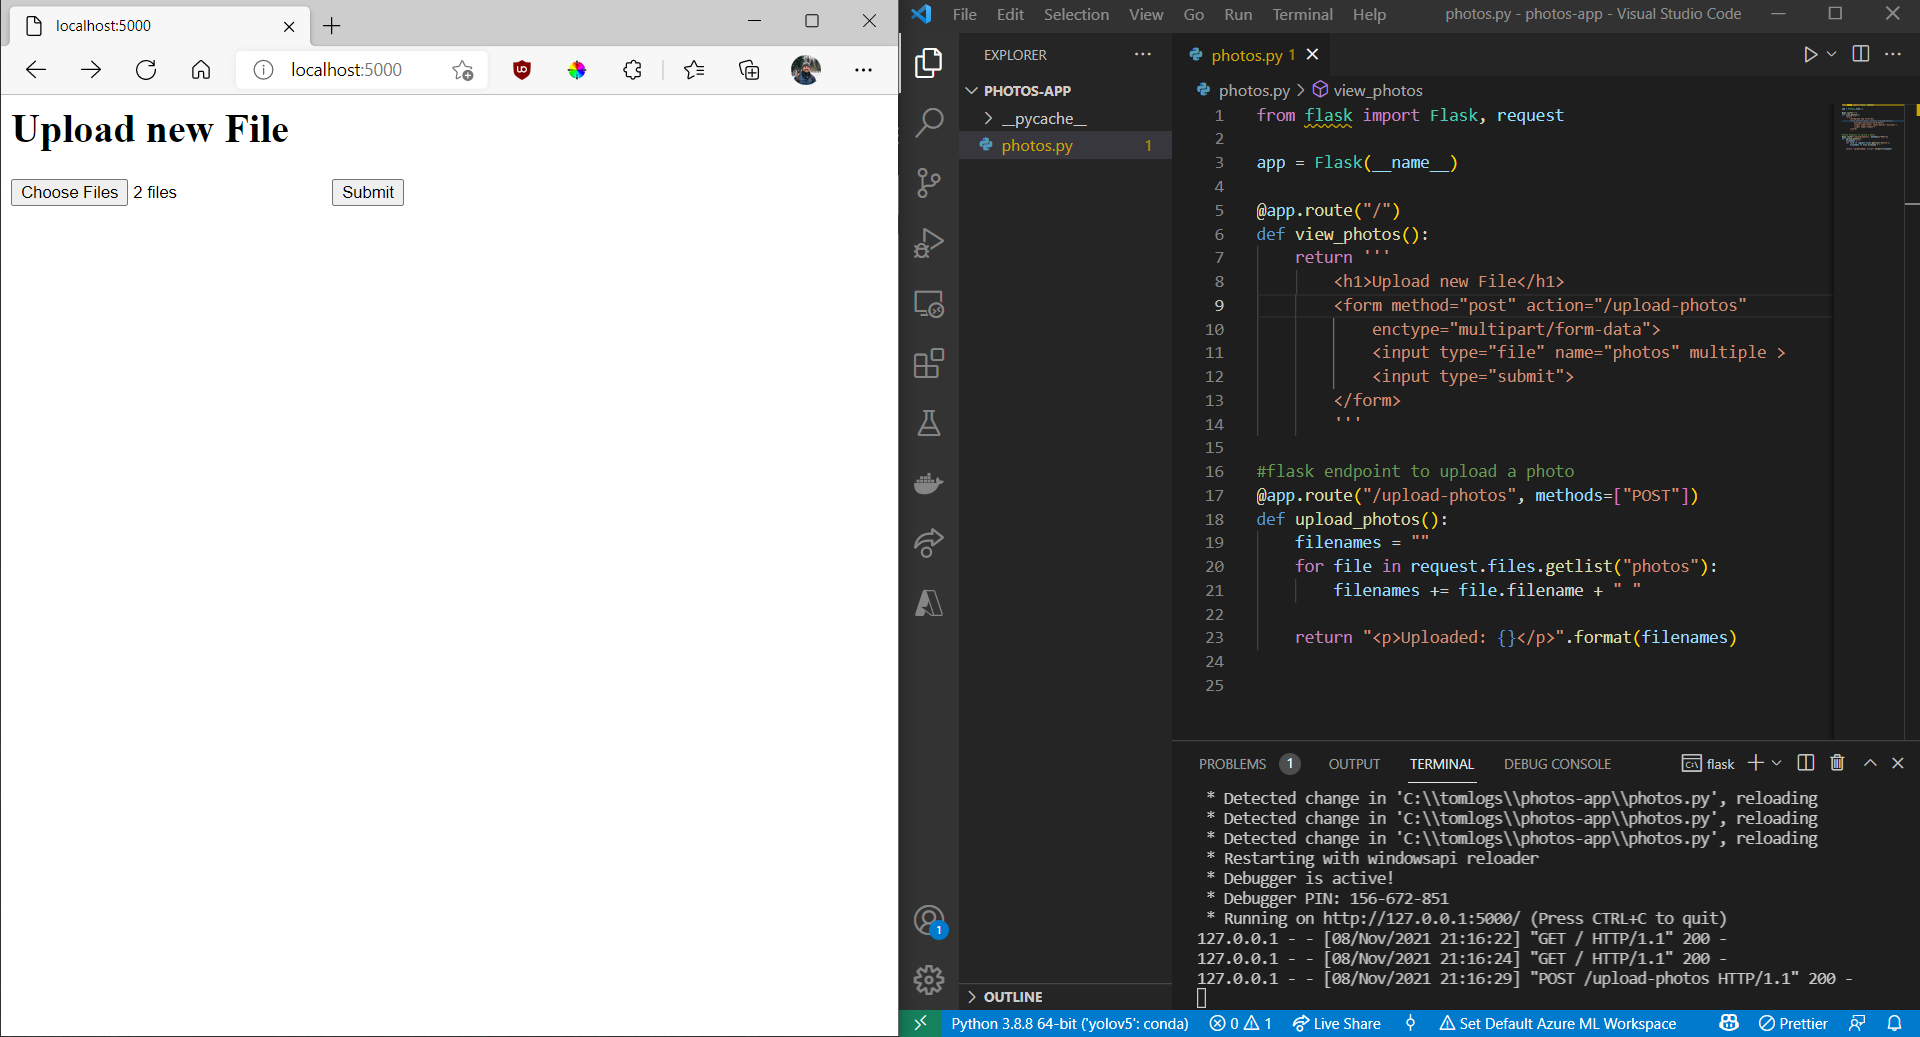 Web Application (left) and source code (right)